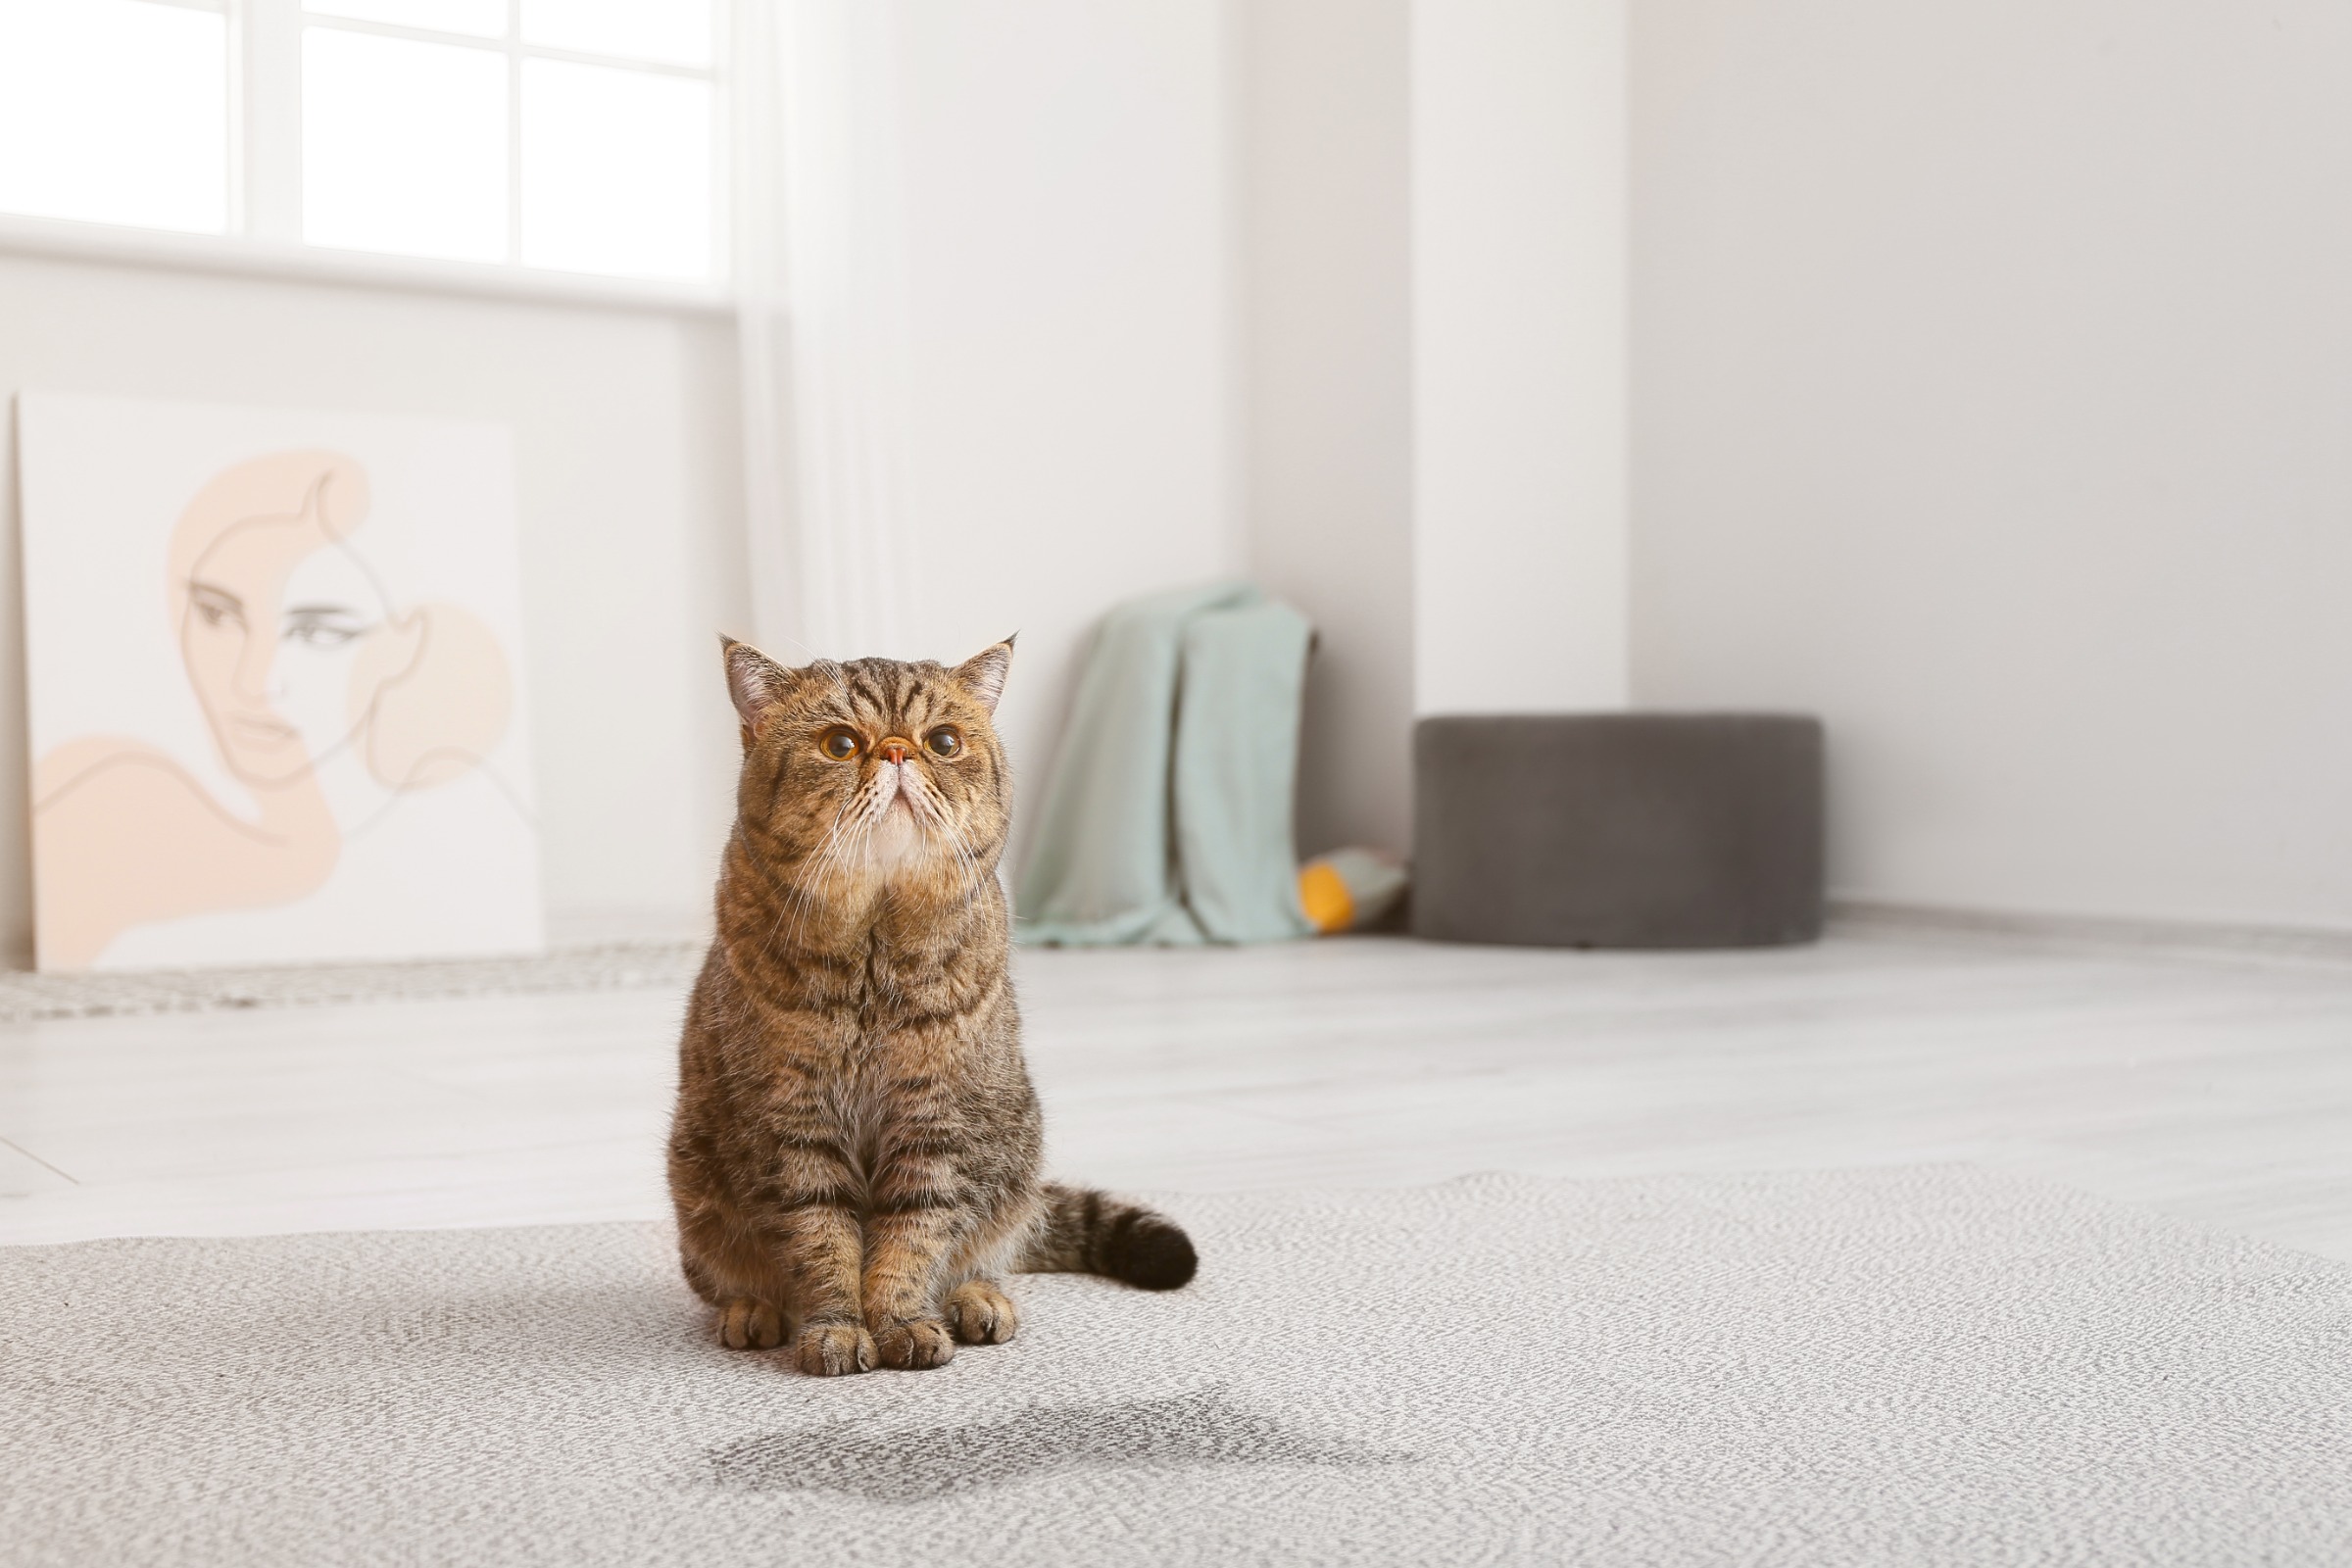 The Ultimate Guide to Flooring for Better Resale Value